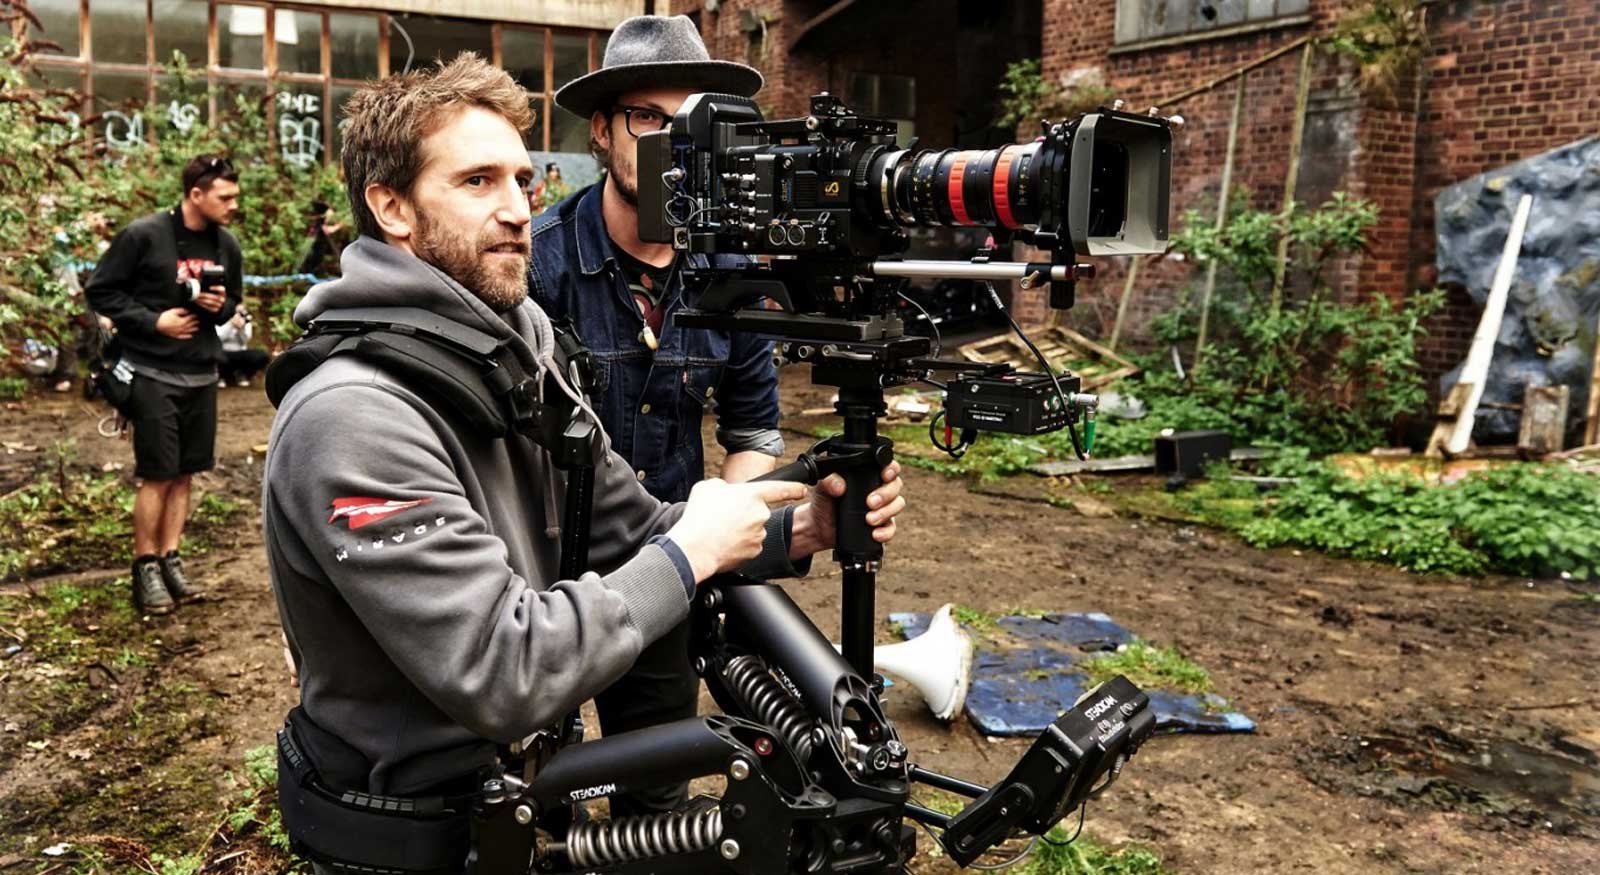 Shooting Schedule Pro Tips for a 10-Page Shoot Day - 9. Overlap master shot steadicam